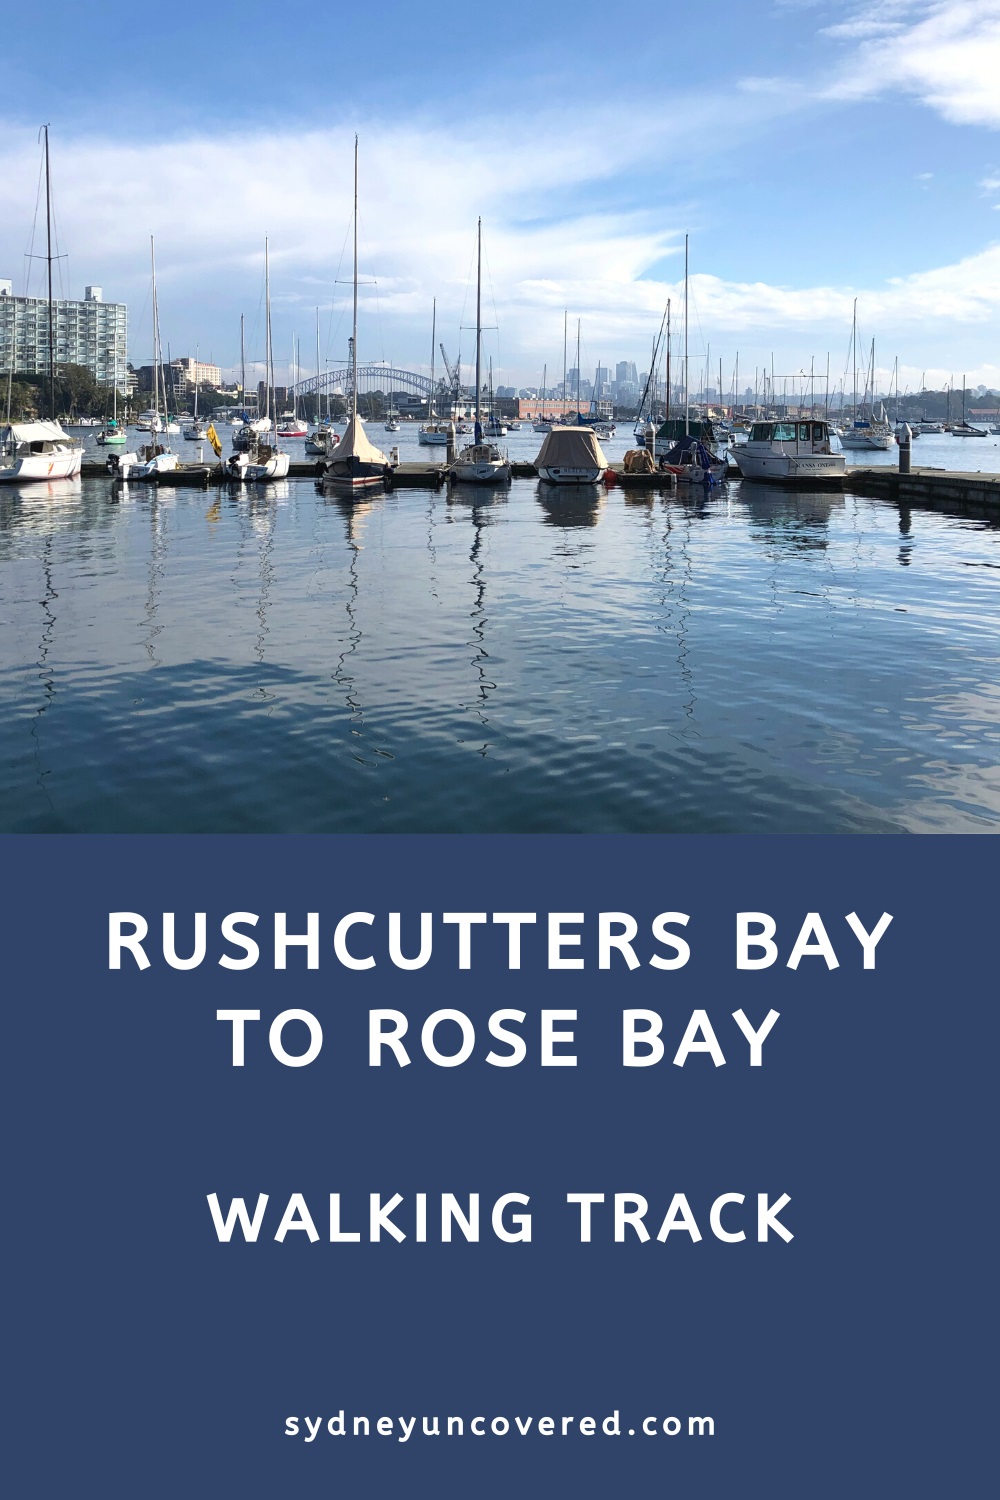 Rushcutters bay to Rose Bay walking track